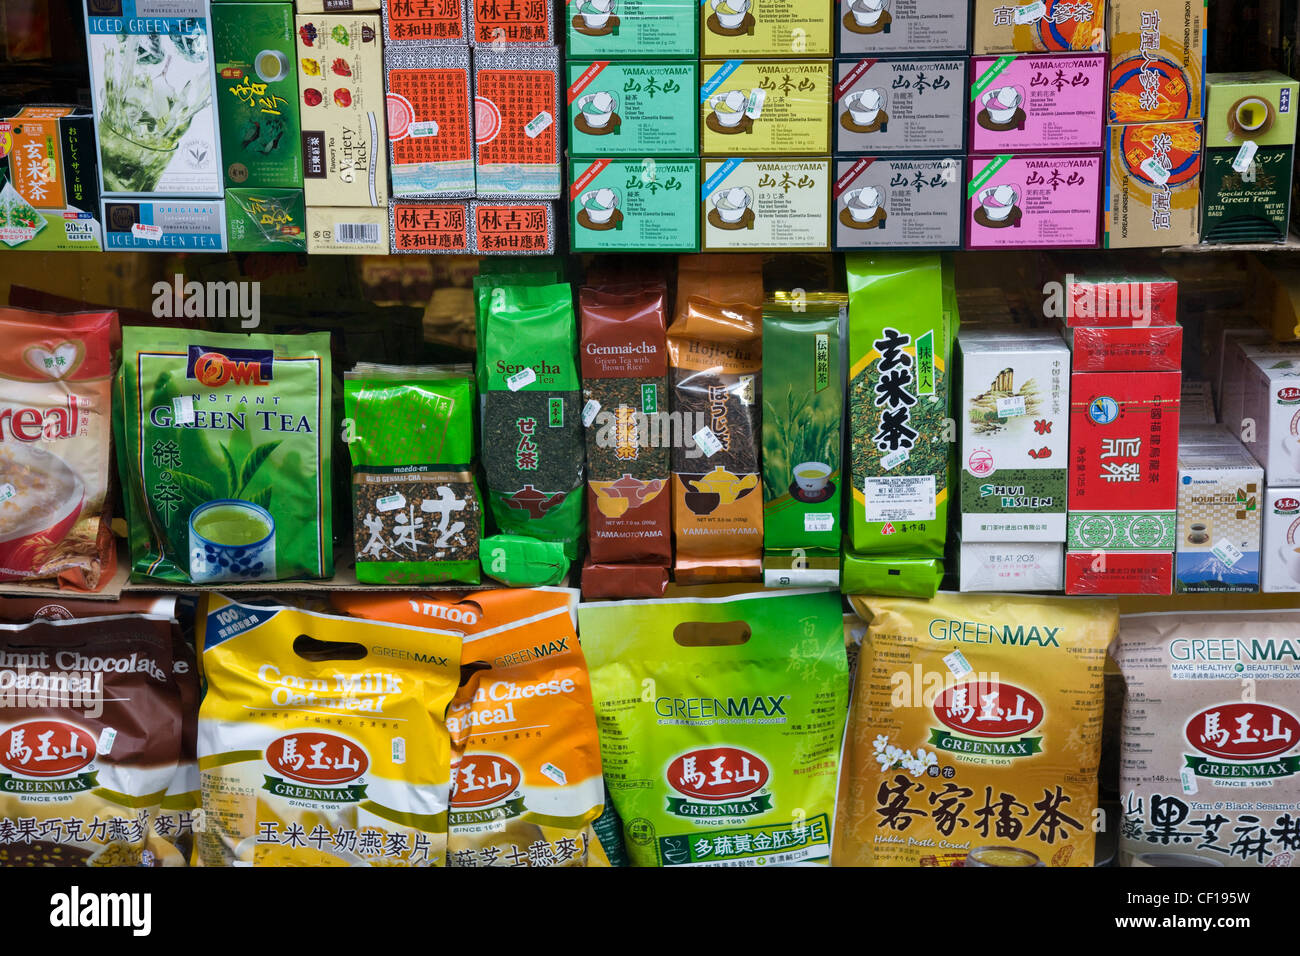 Shop window in Chinatown, London, with a range of Chinese teas, herbs, rice crackers and biscuits Stock Photo